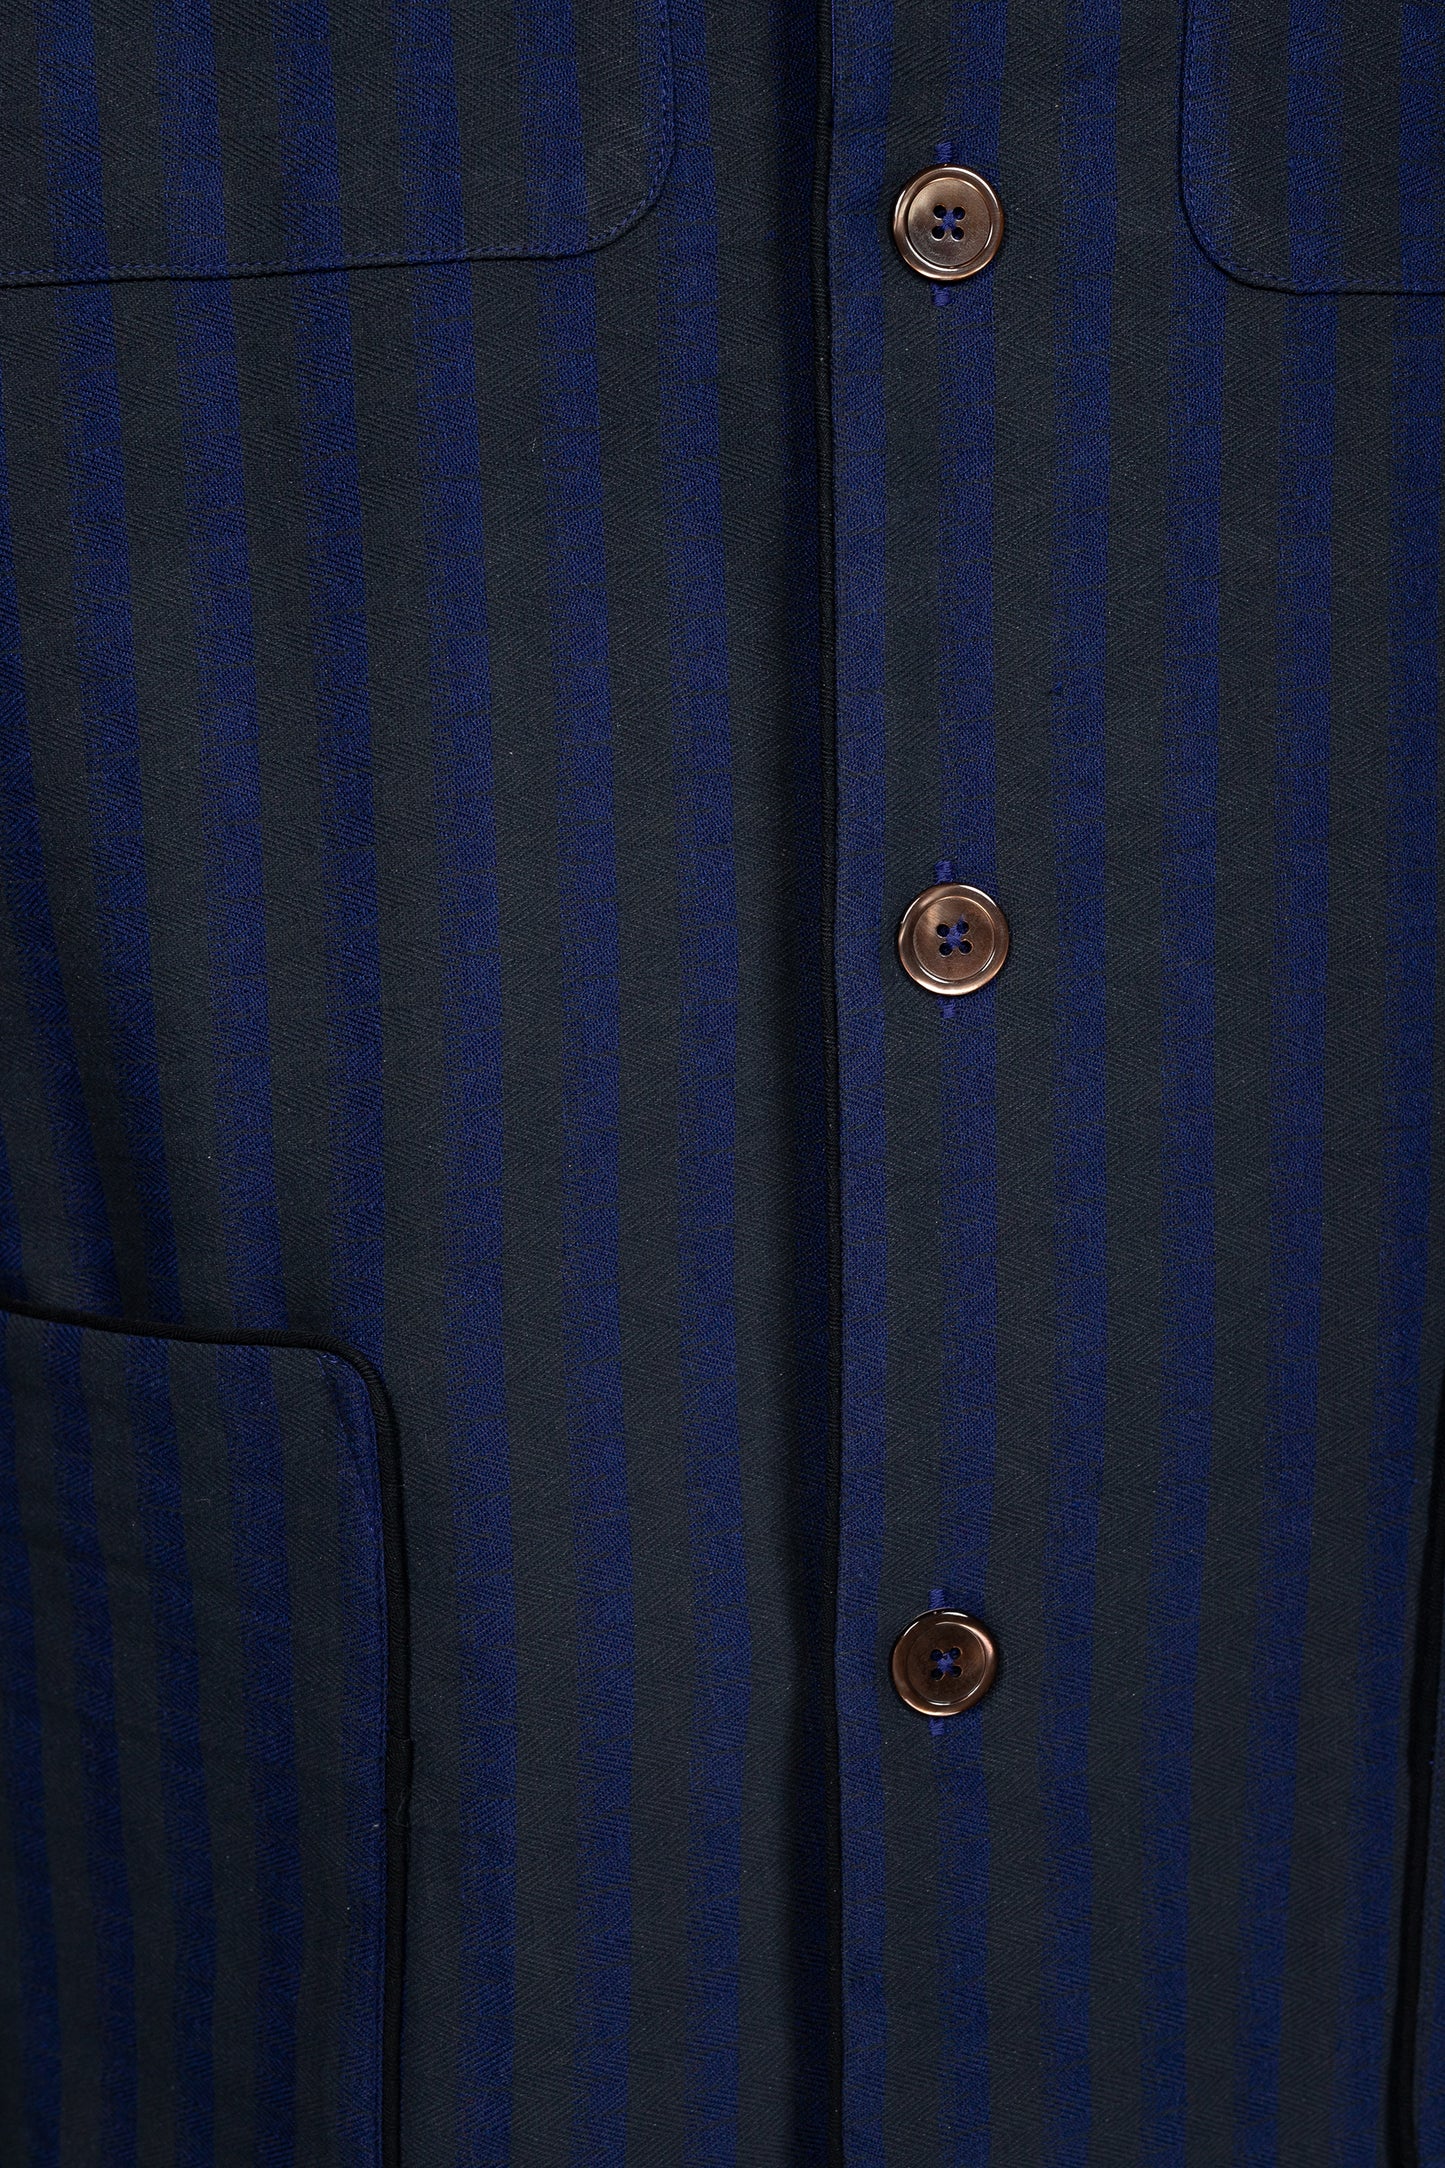 COLONEL-JACKET BLUE-Black-black with black piping 100% COTTON Herringbone-Thick, Brushed-inside Broad-Stripes screen-print